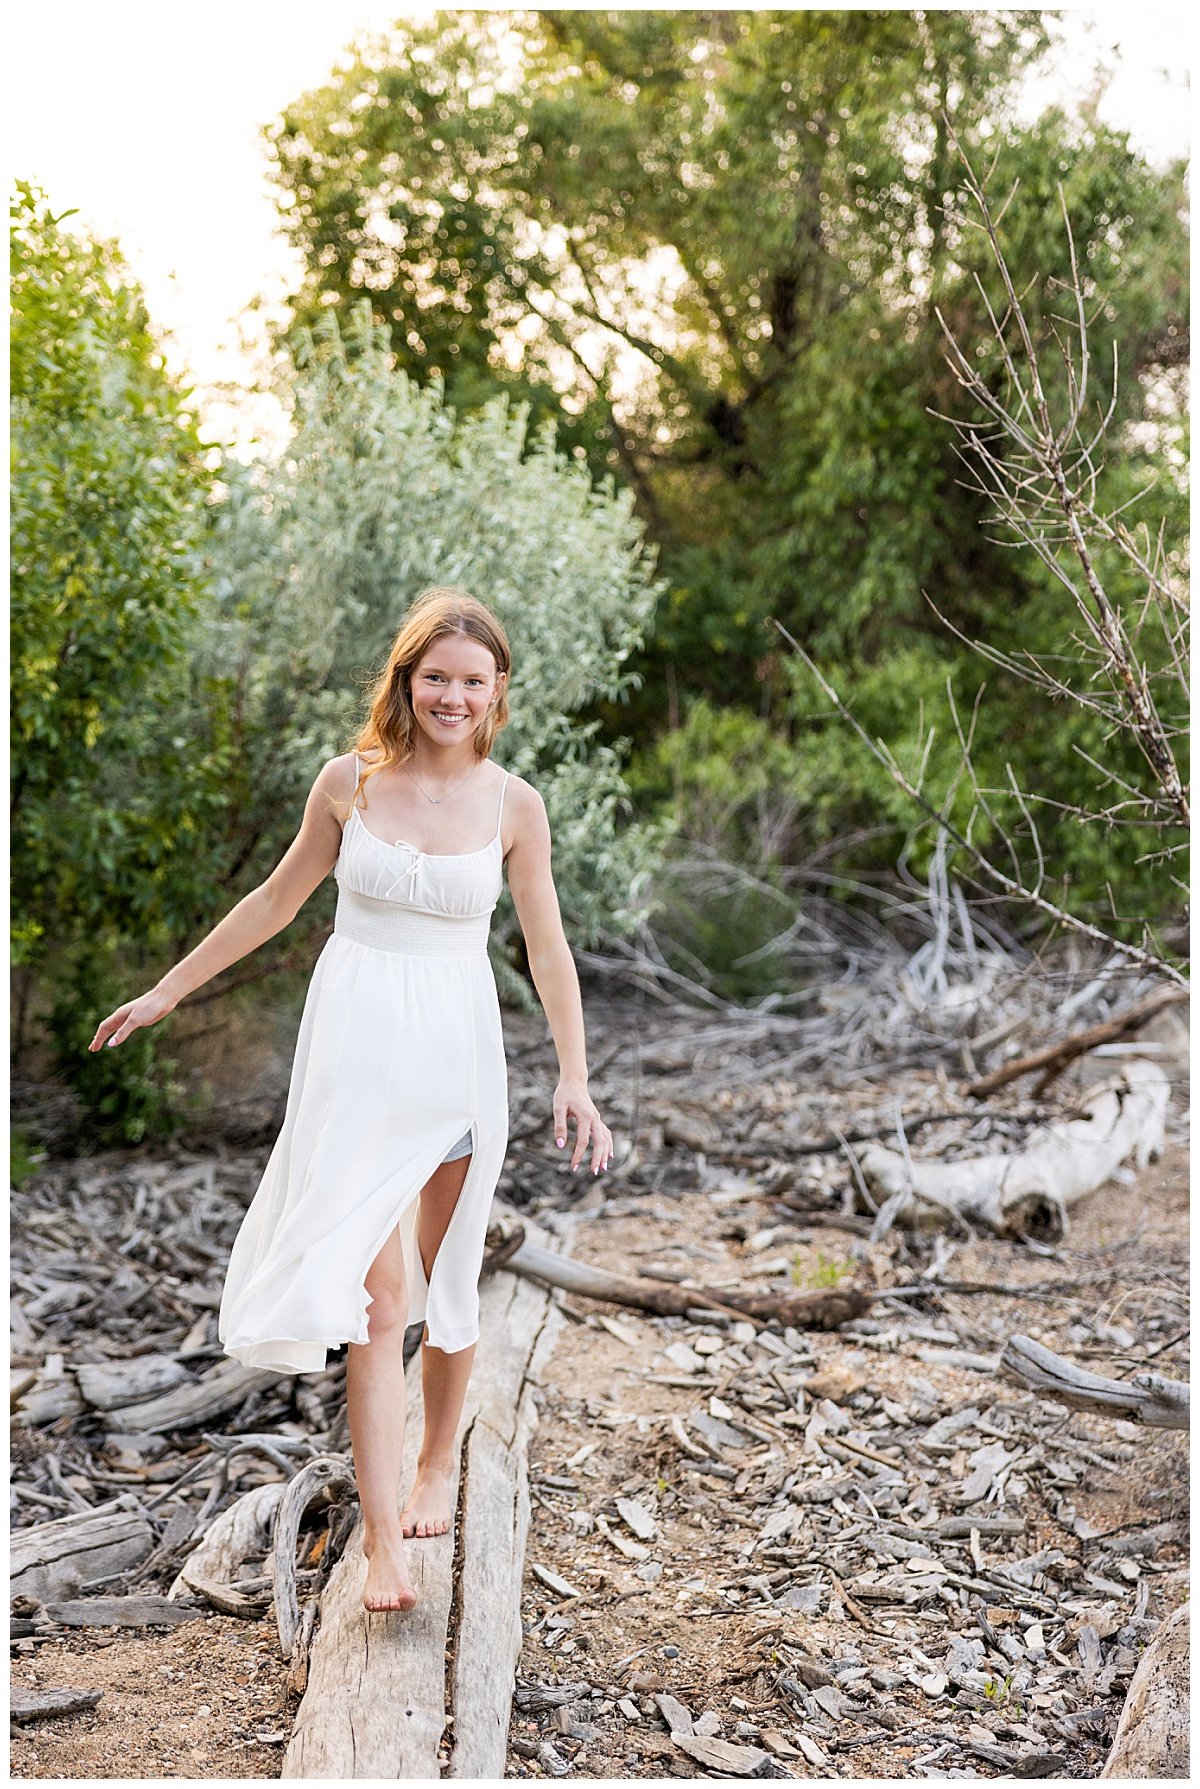 A high school senior is shown balancing on a fallen tree, barefoot in a white dress in Lewis & Clark State Park during her senior photo session with Kellie Rochelle Photography.